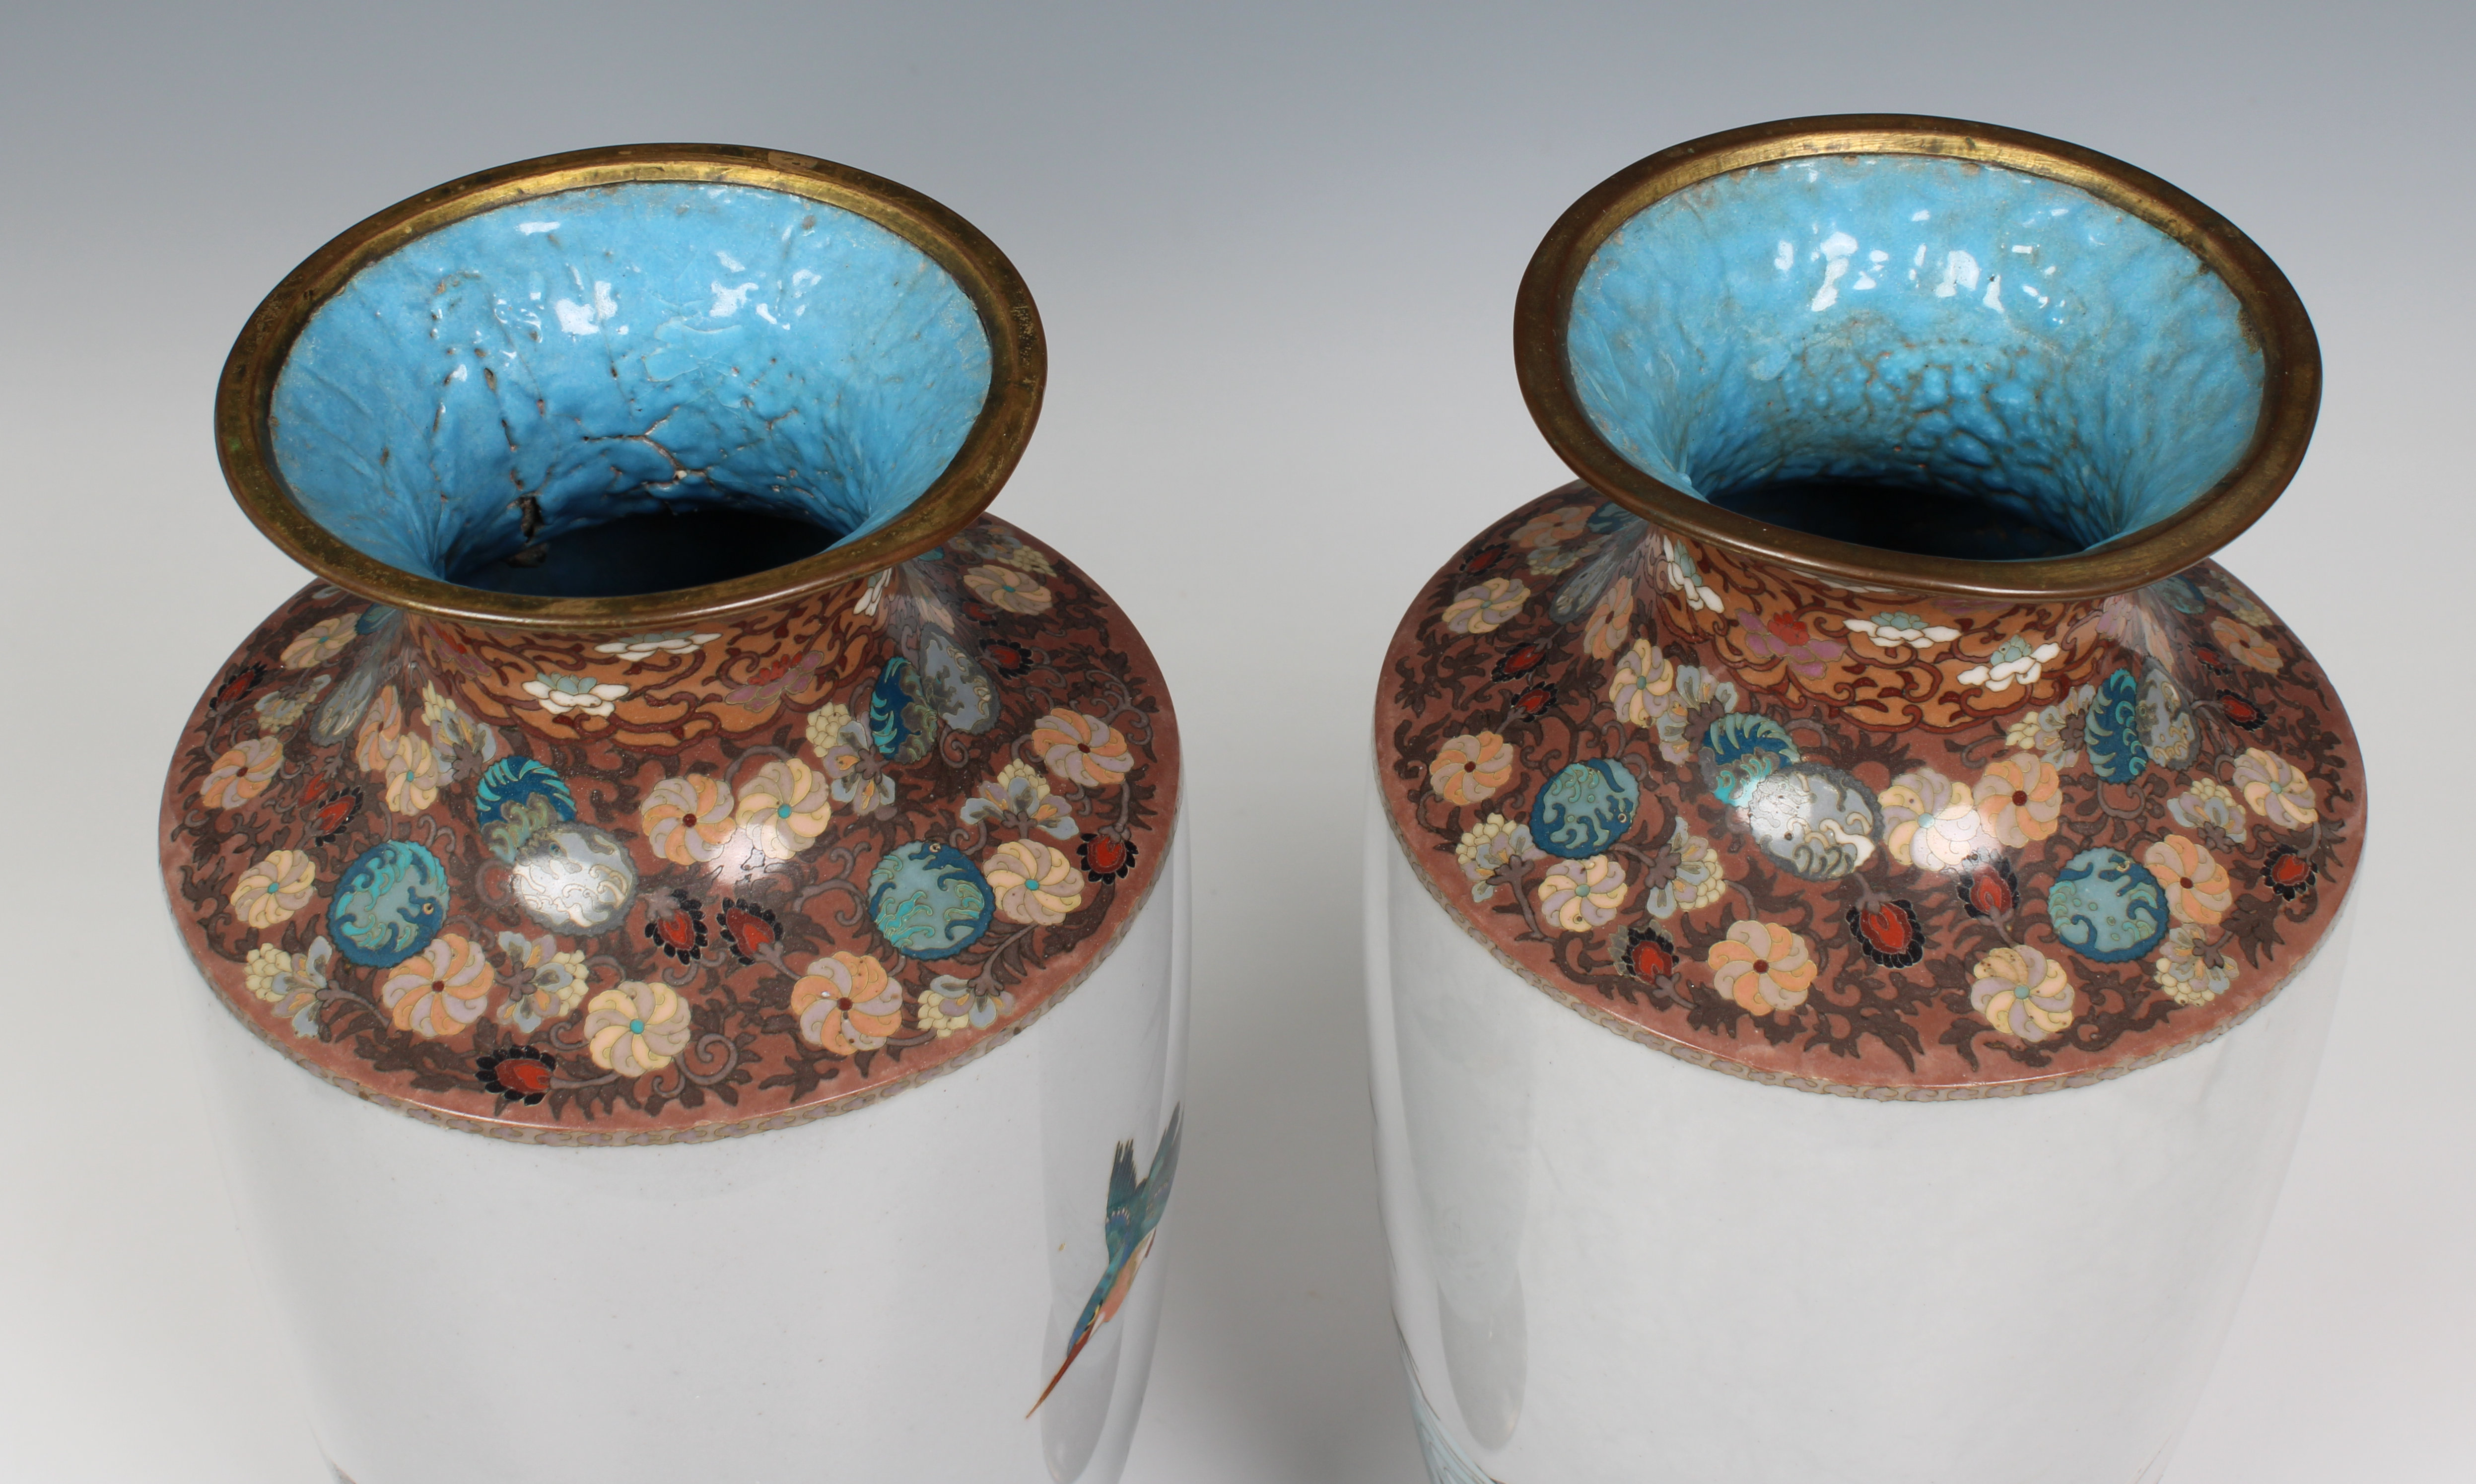 Pair of Japanese cloisonné vases in the manner of Namikawa Sosuke (1847-1910) - Image 5 of 7